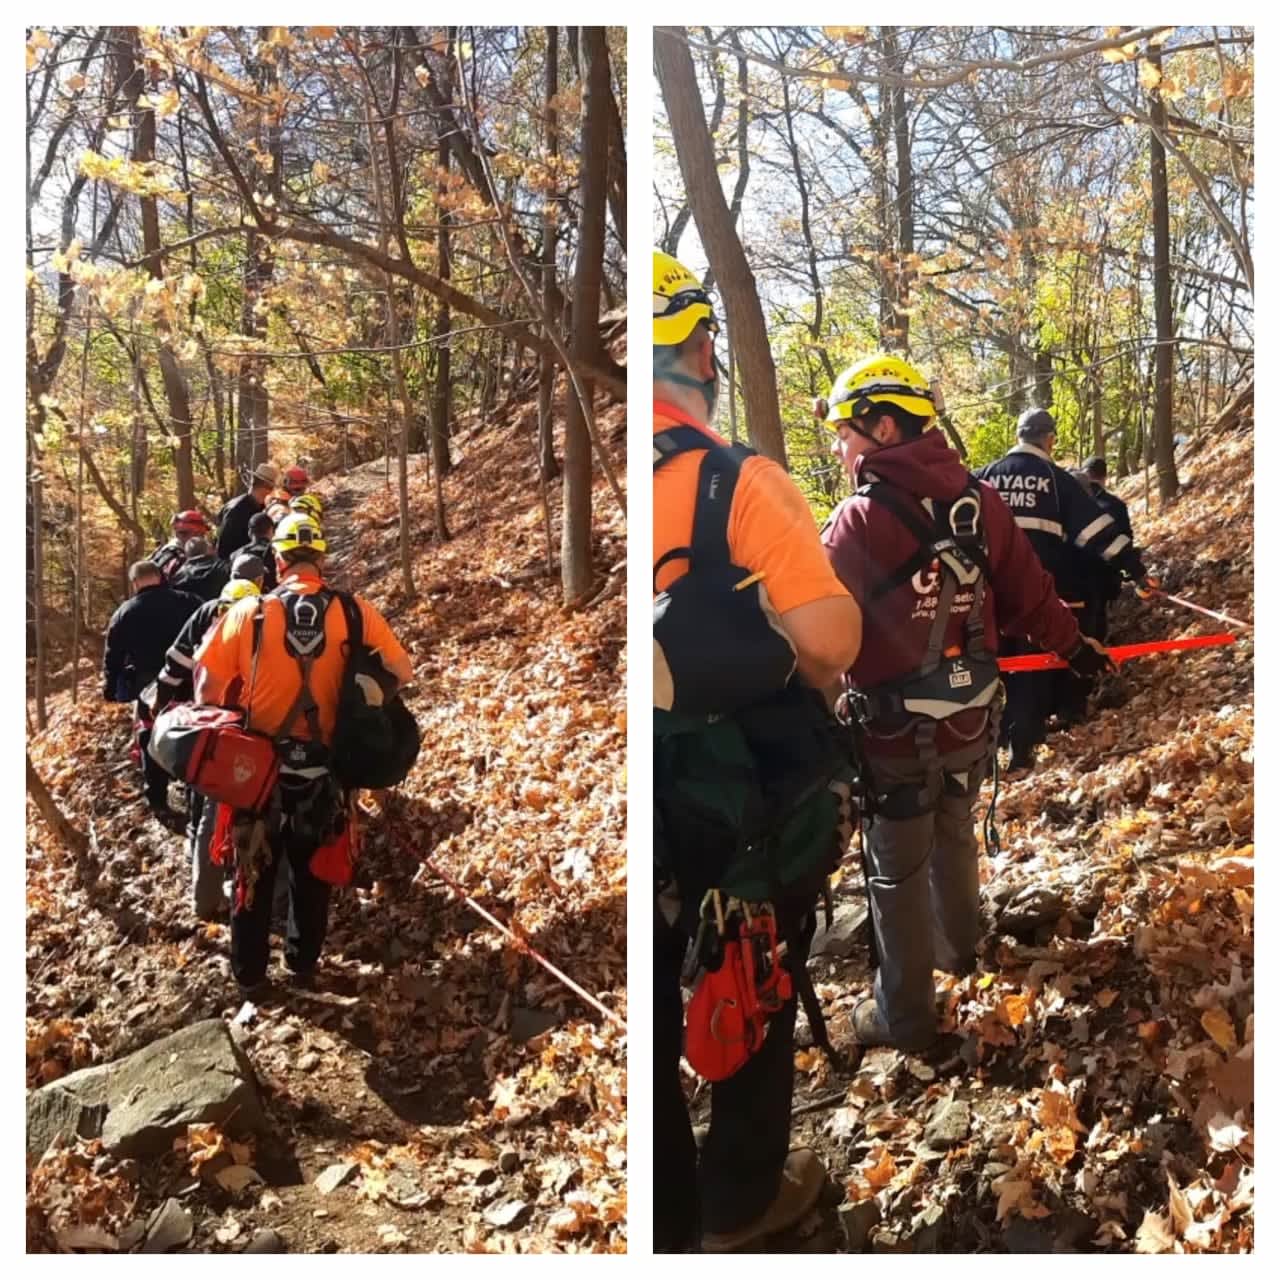 The rescuers at work saved a missing man after he fell in a steep, heavily wooded area.